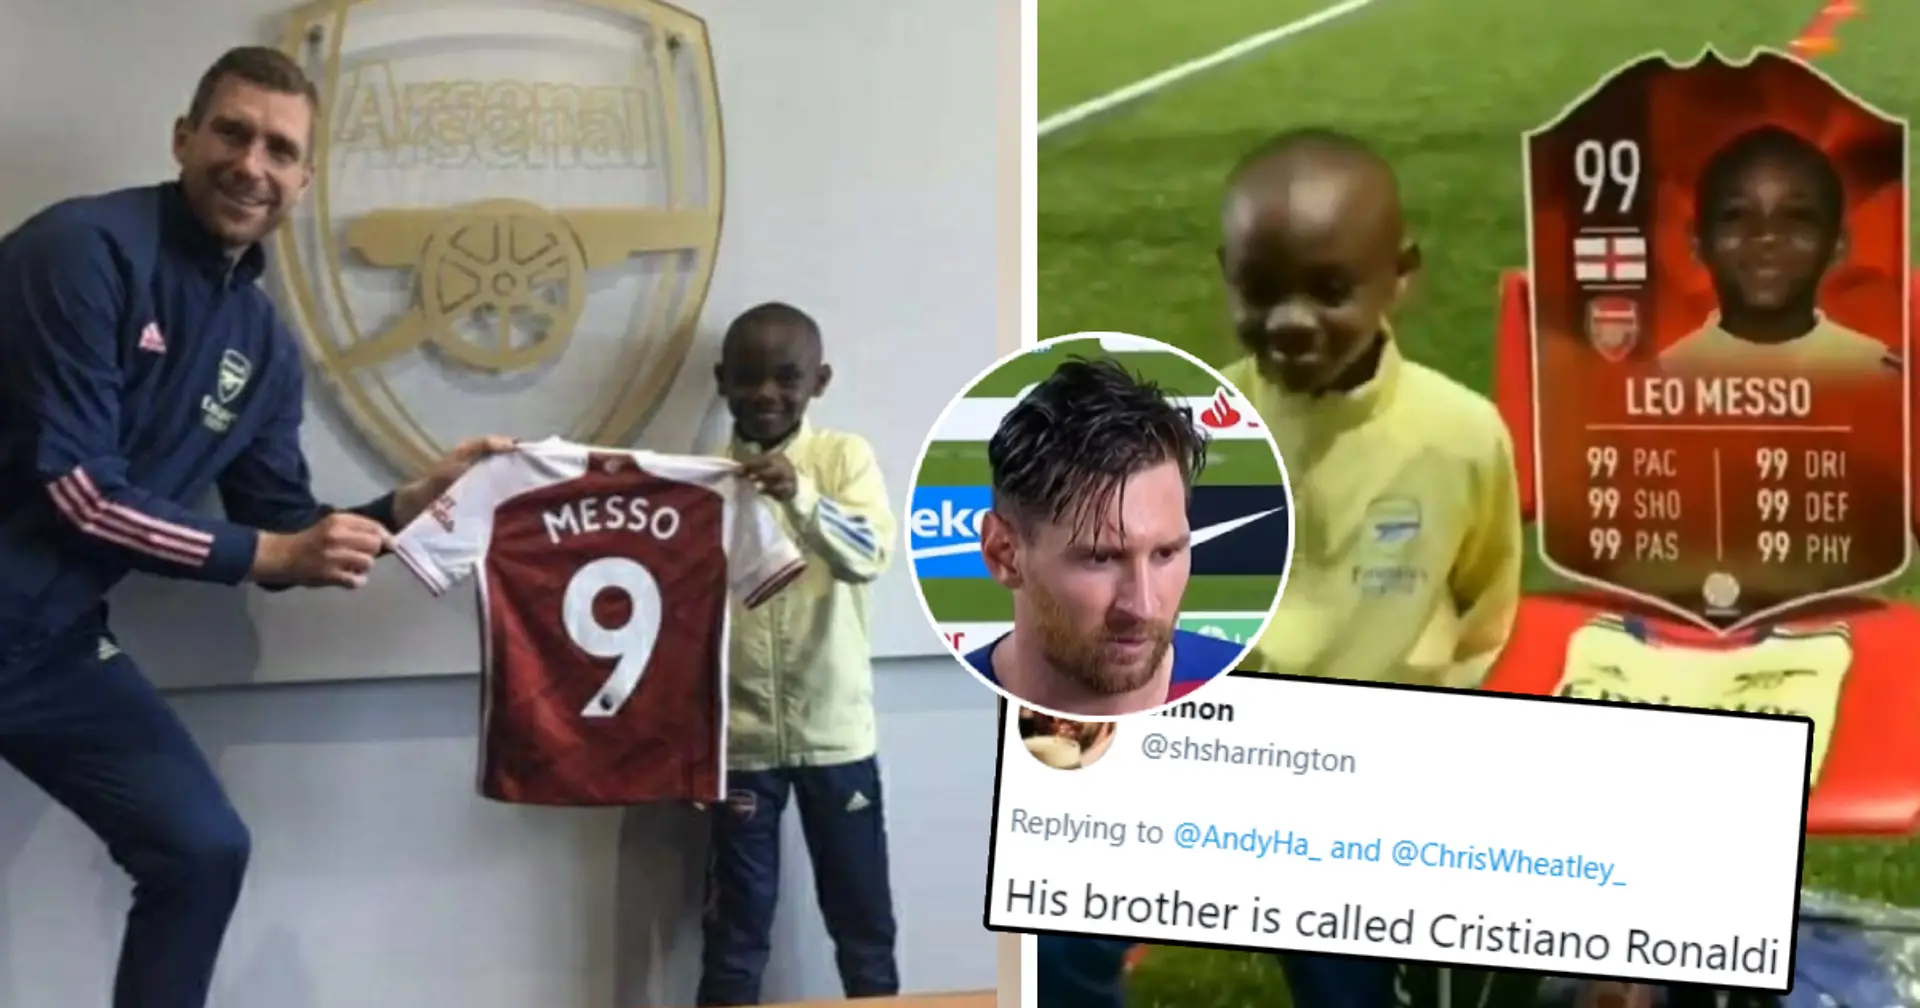 Arsenal have signed 10-year-old Kenyan youngster Leo Messo